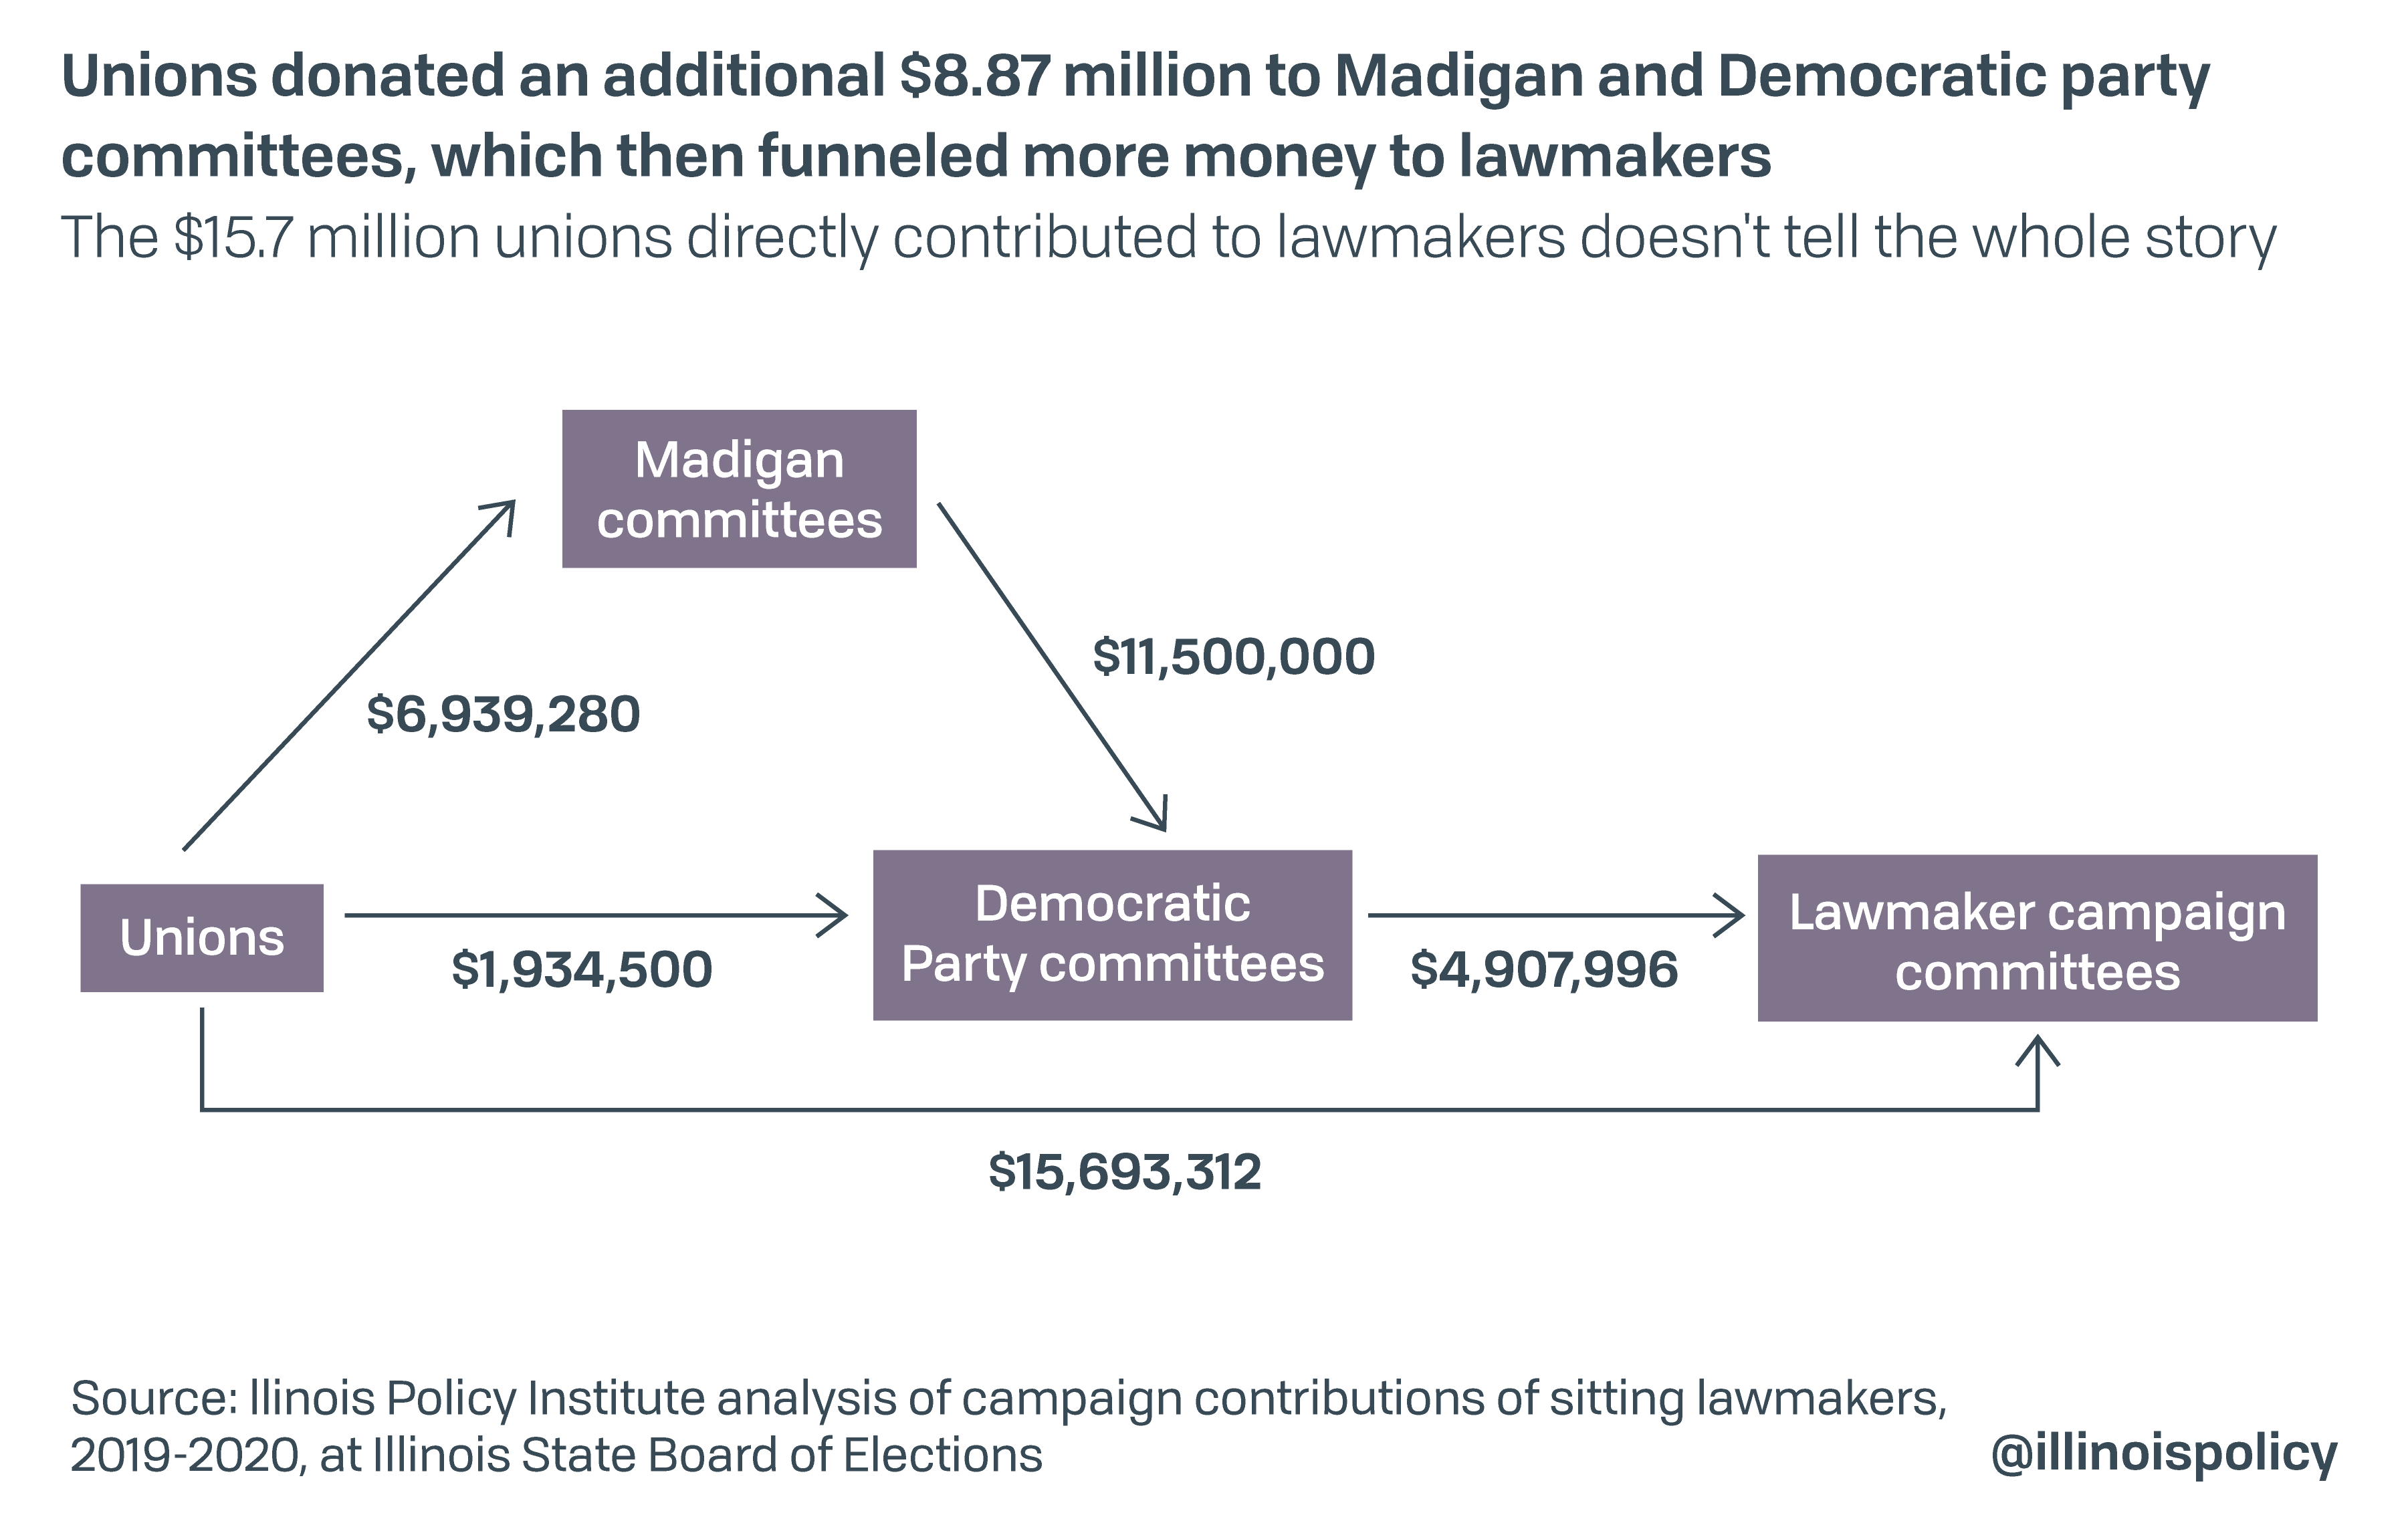 Unions donated an additional $8.87 million to Madigan and Democratic Party committees, which then funneled more money to lawmakers